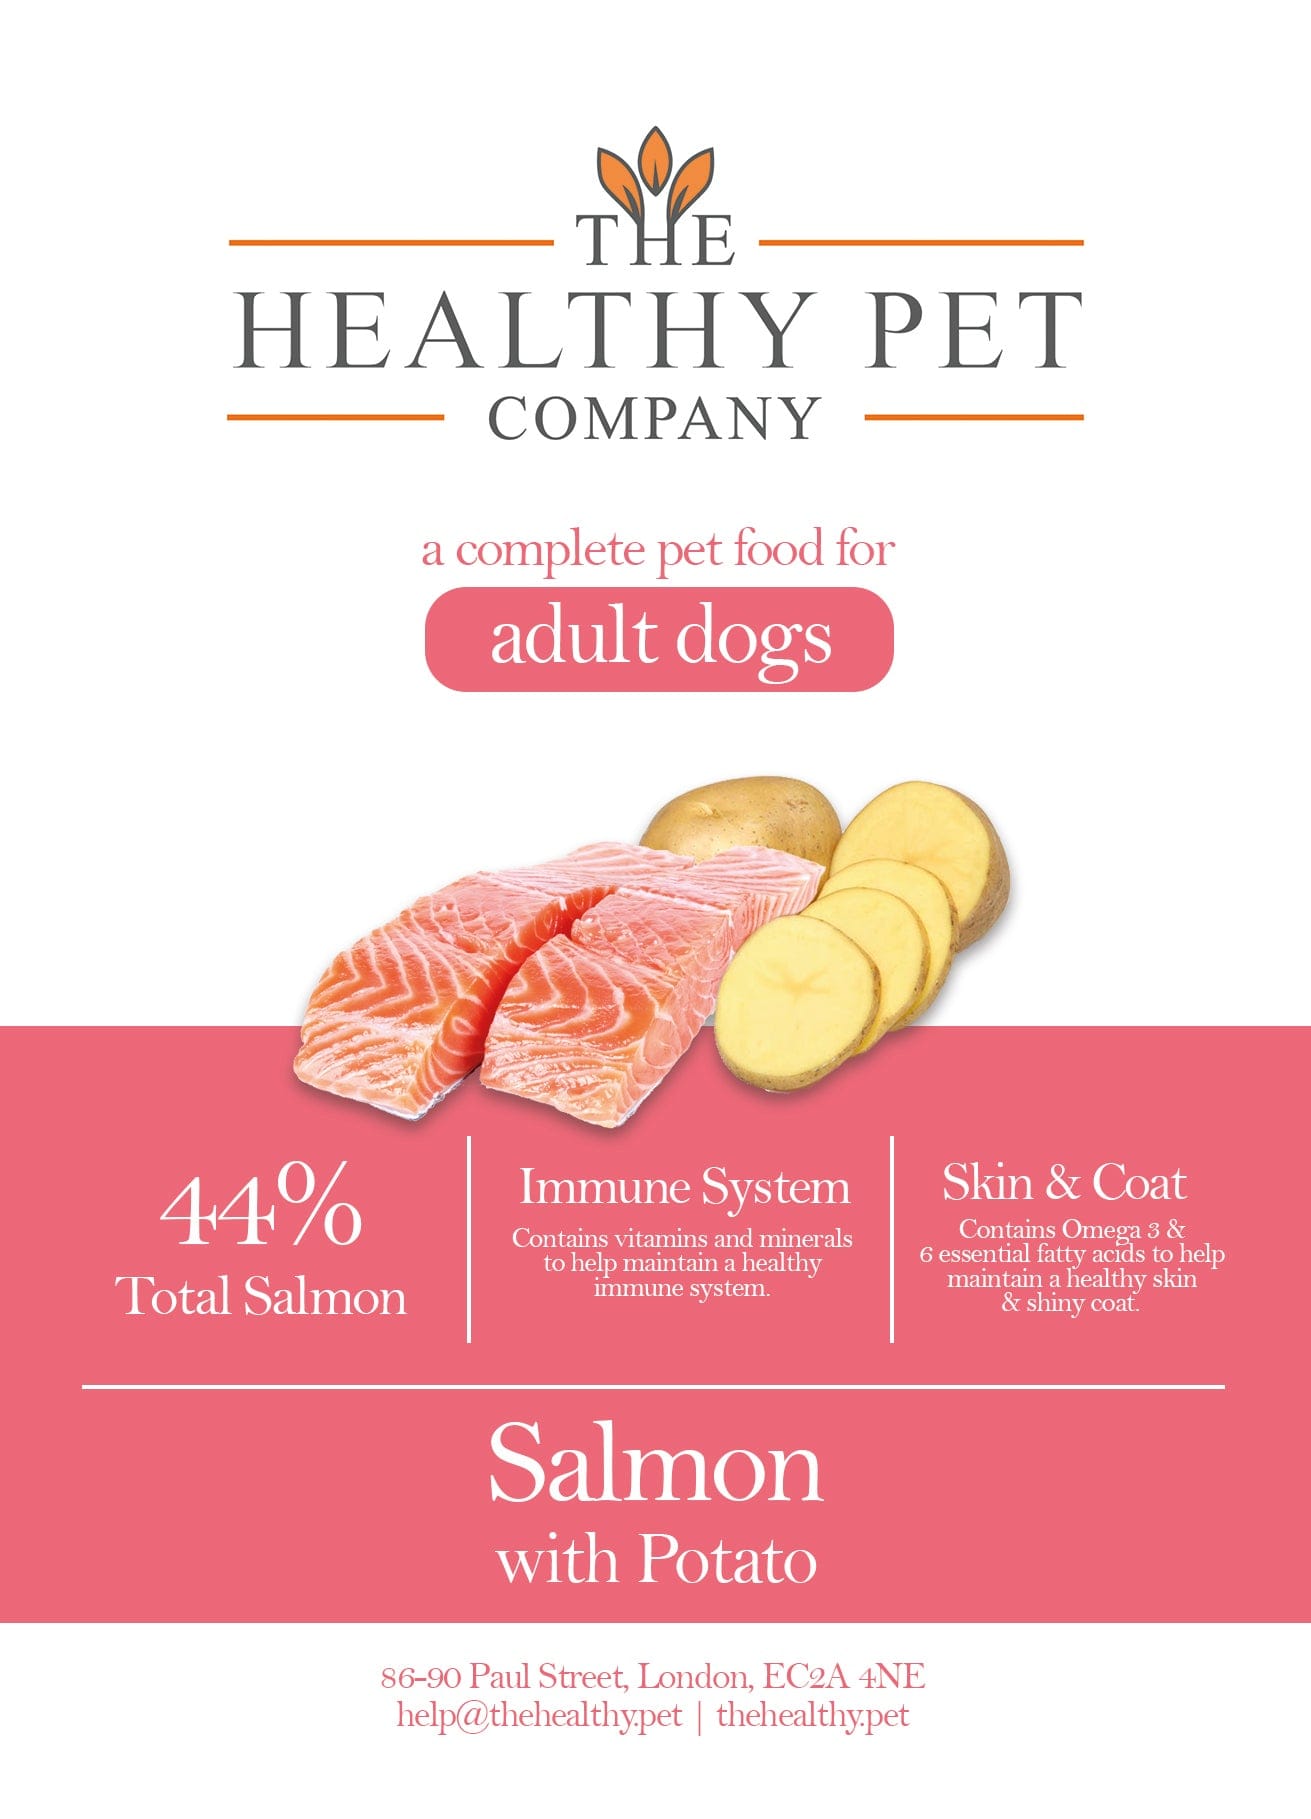 The Healthy Pet Company Complete Meal - Salmon with Potato for Adult Dogs - The Healthy Pet Company